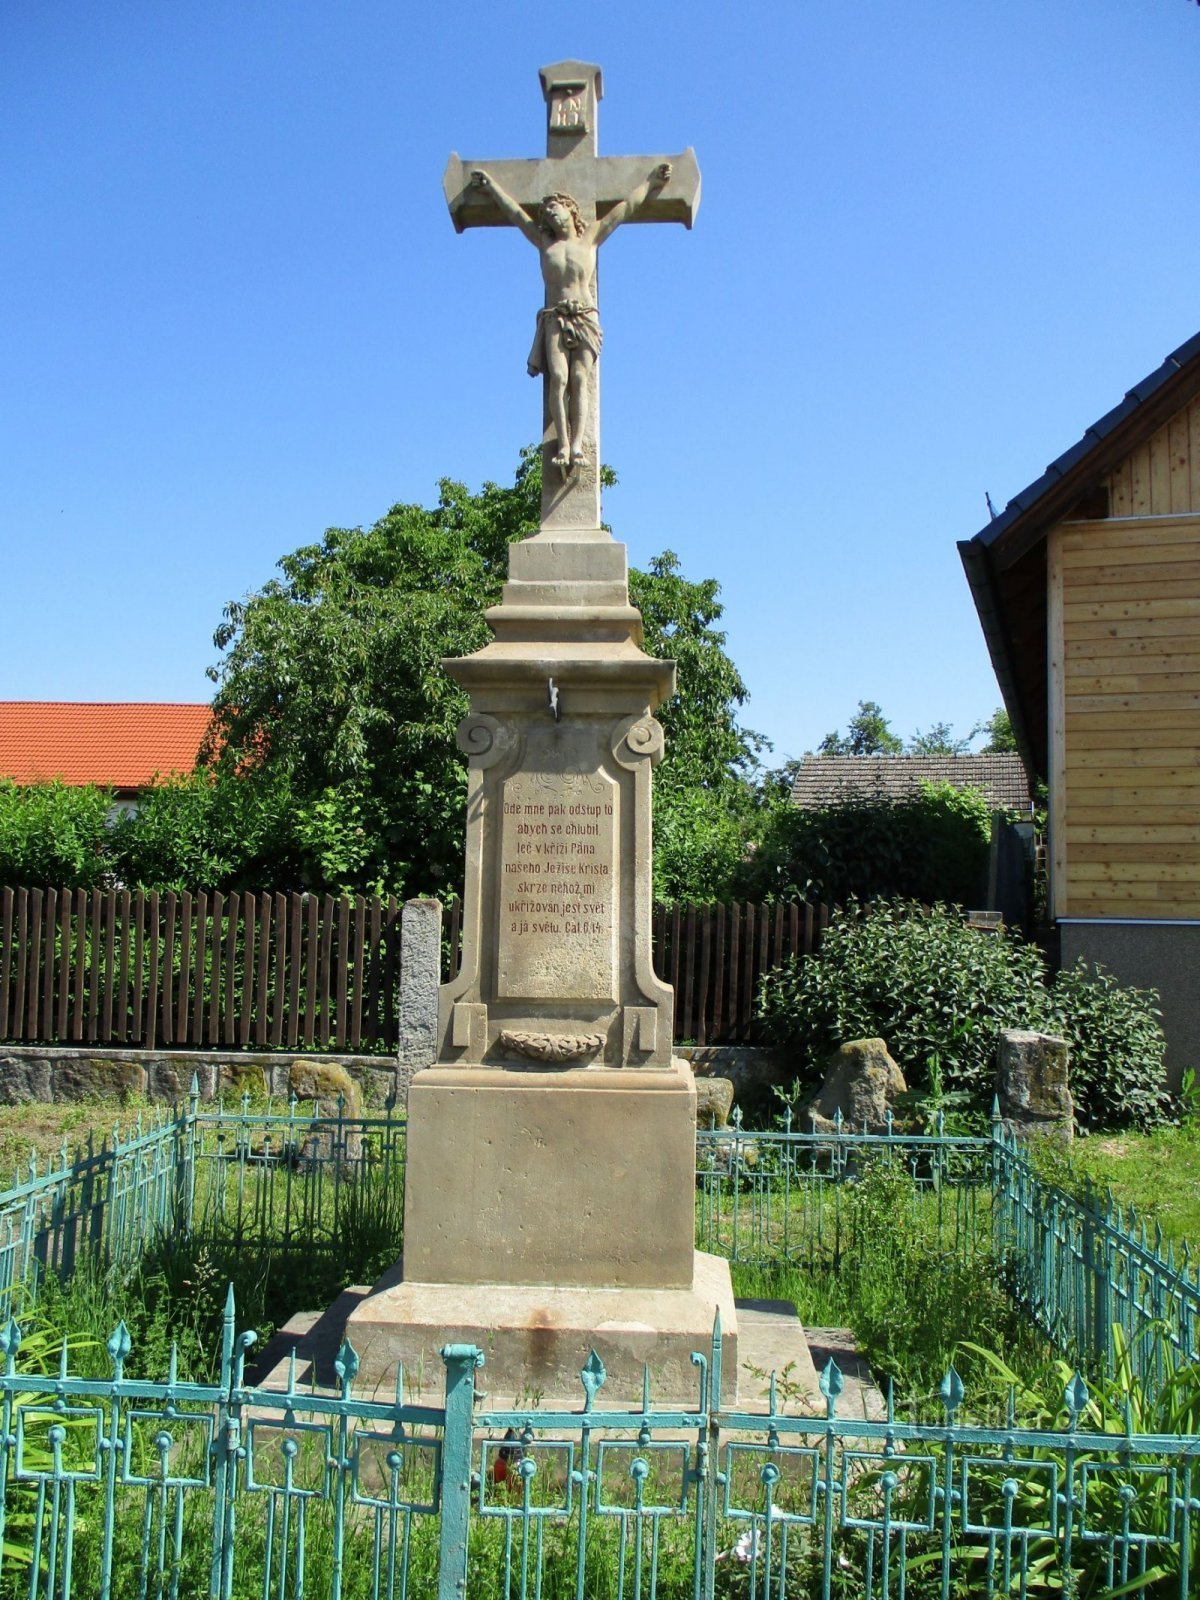 A cross with a group of reconciliation crosses in the background (Třebovětice, 4.6.2019 June XNUMX)